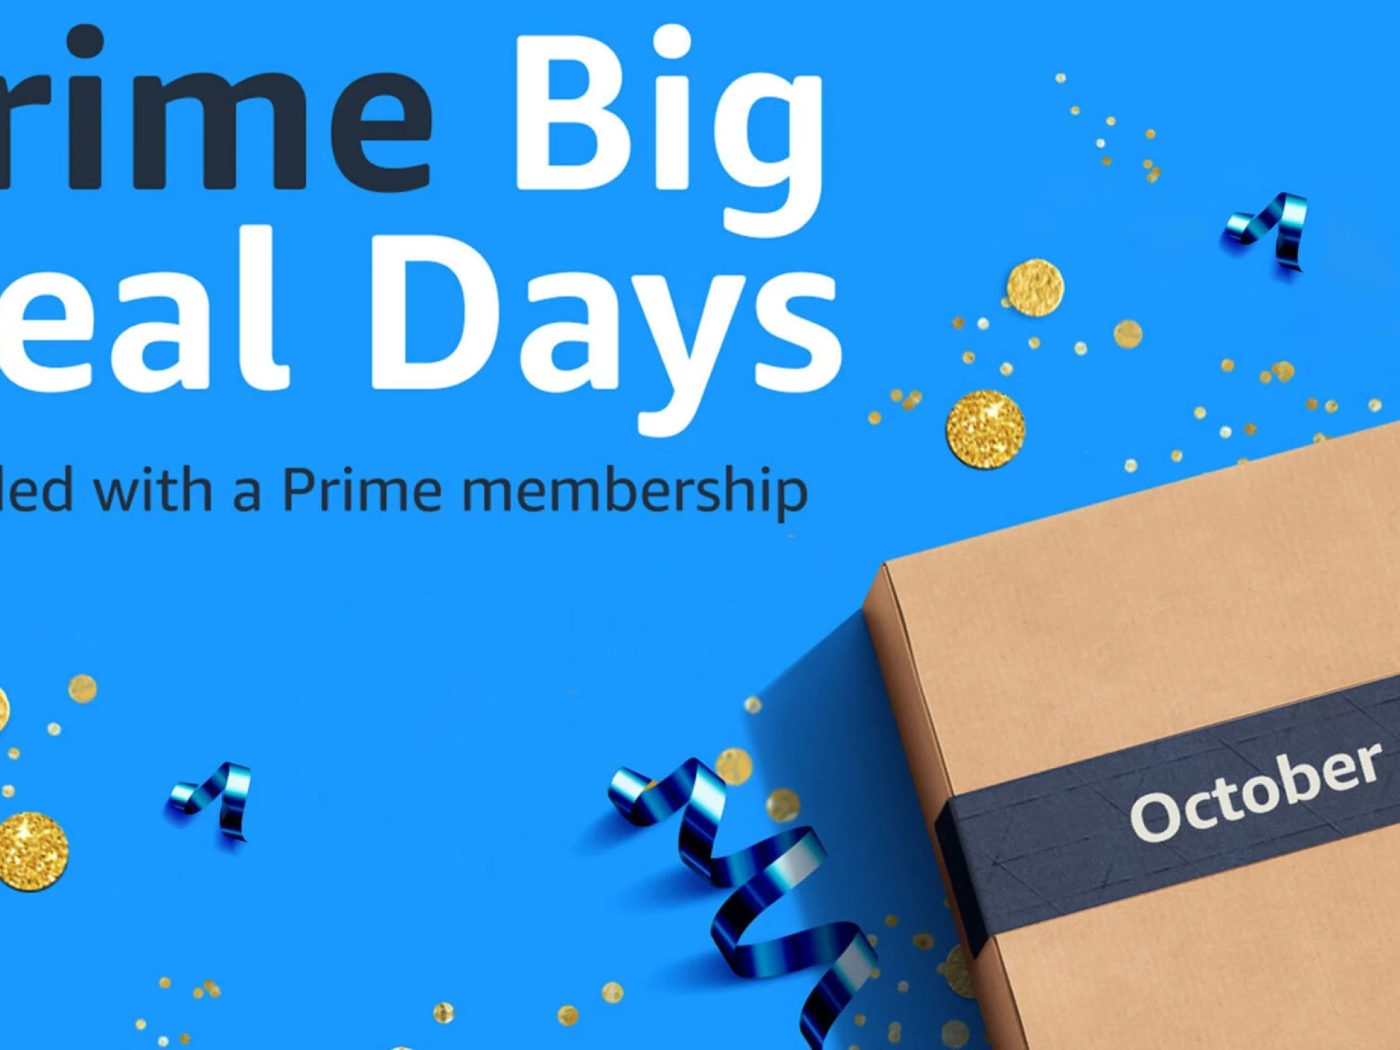 Prime Day 2020 will feature tons of limited-time 'Lightning